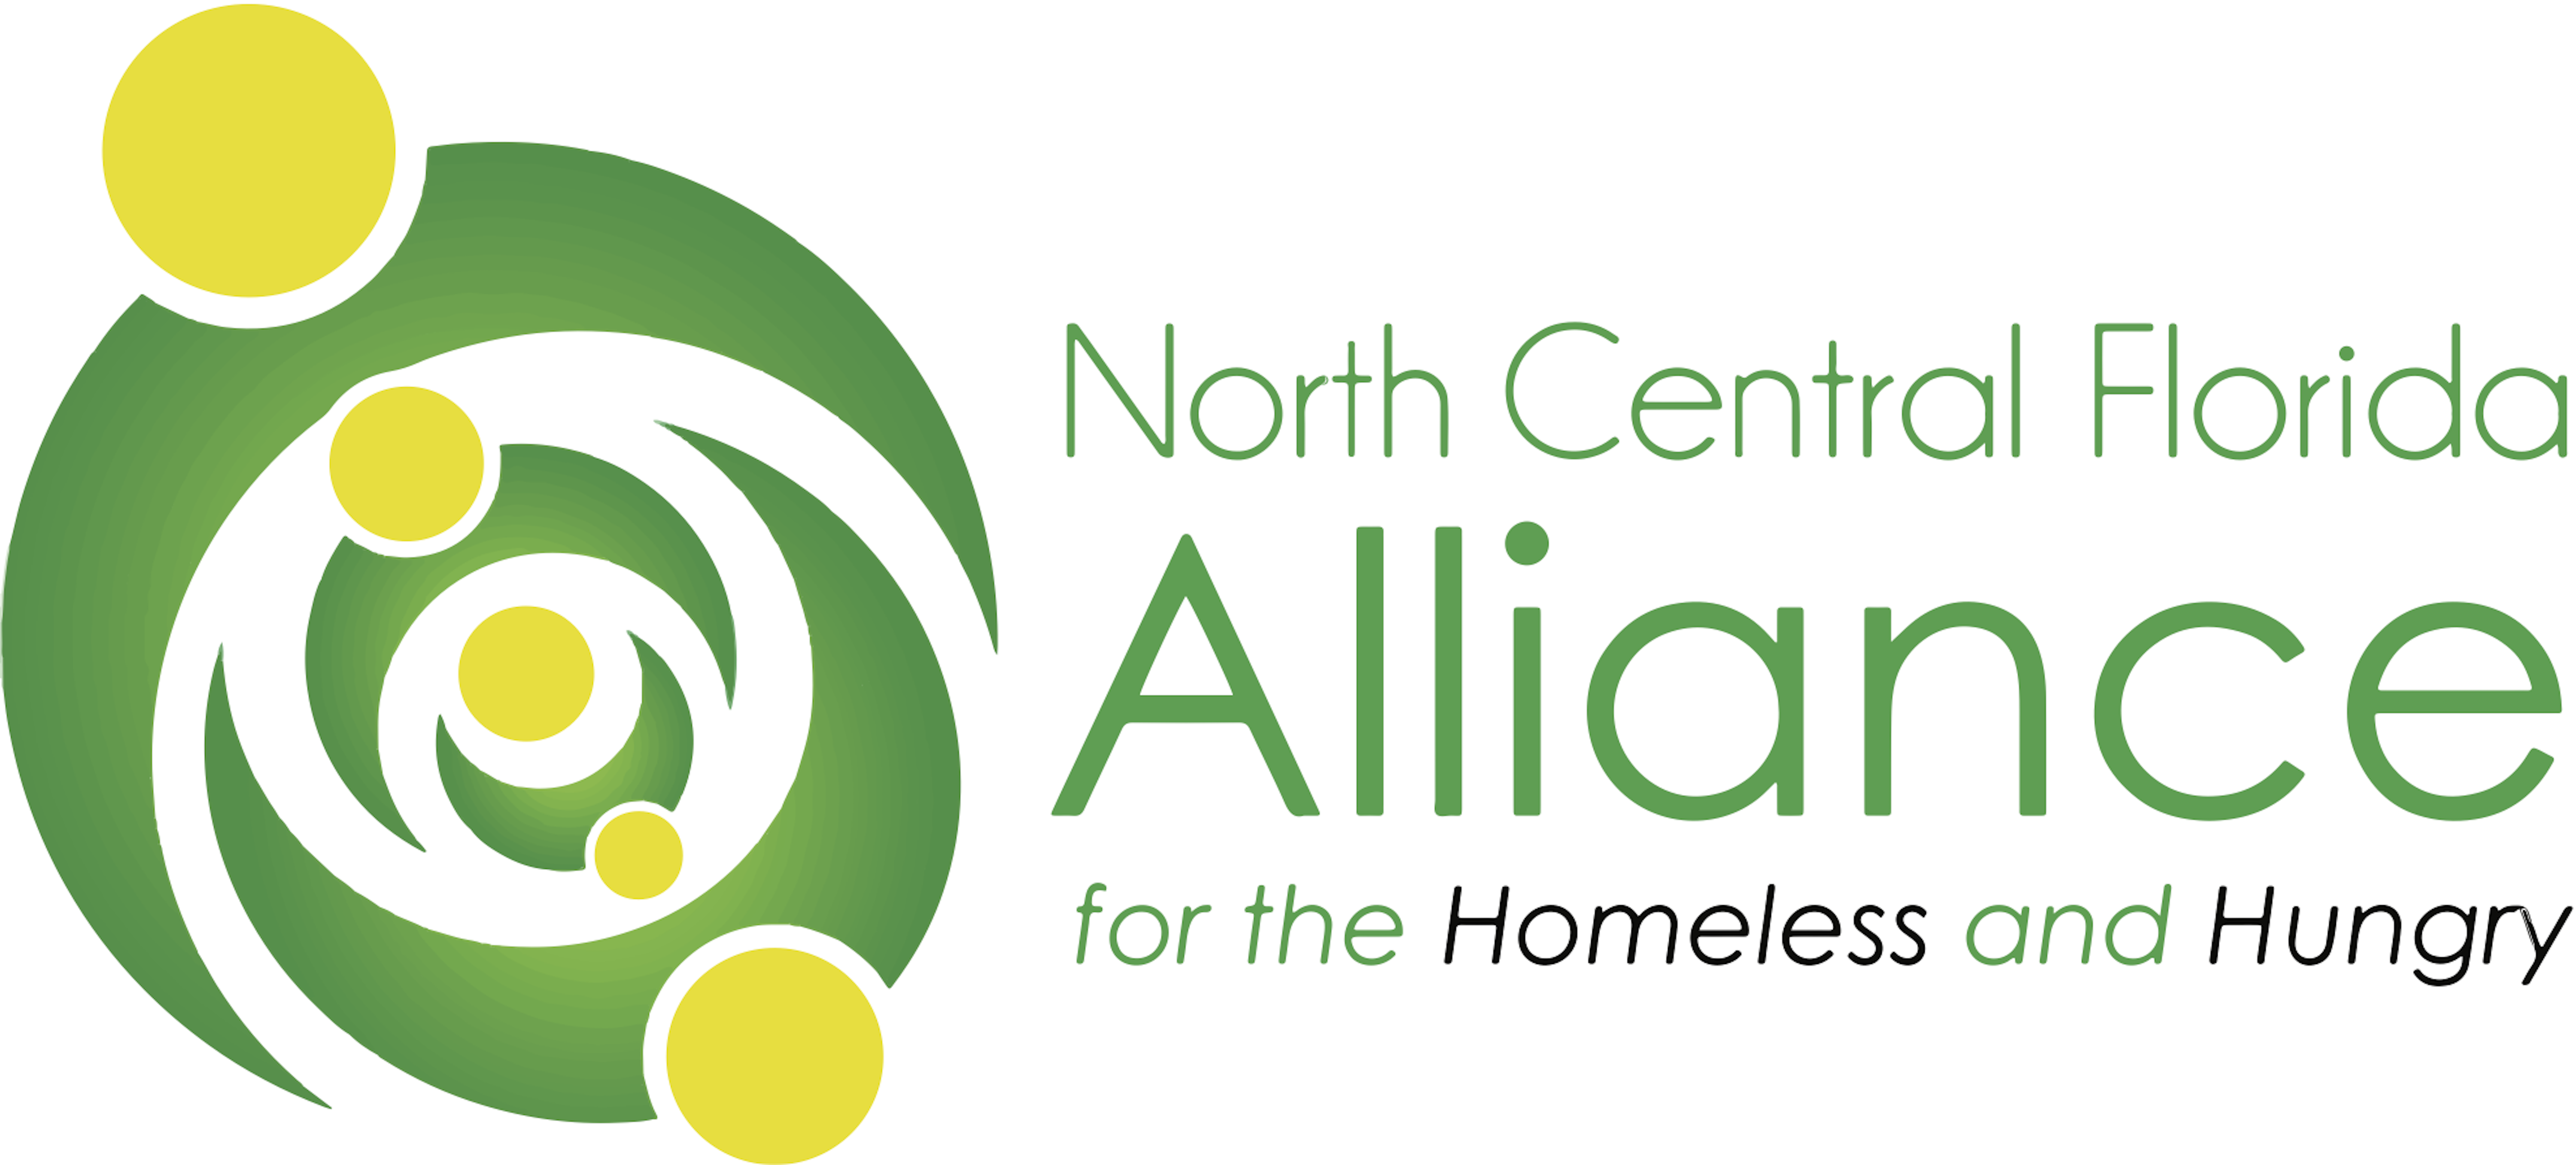 North Central Florida Alliance for the Homeless and Hungry 